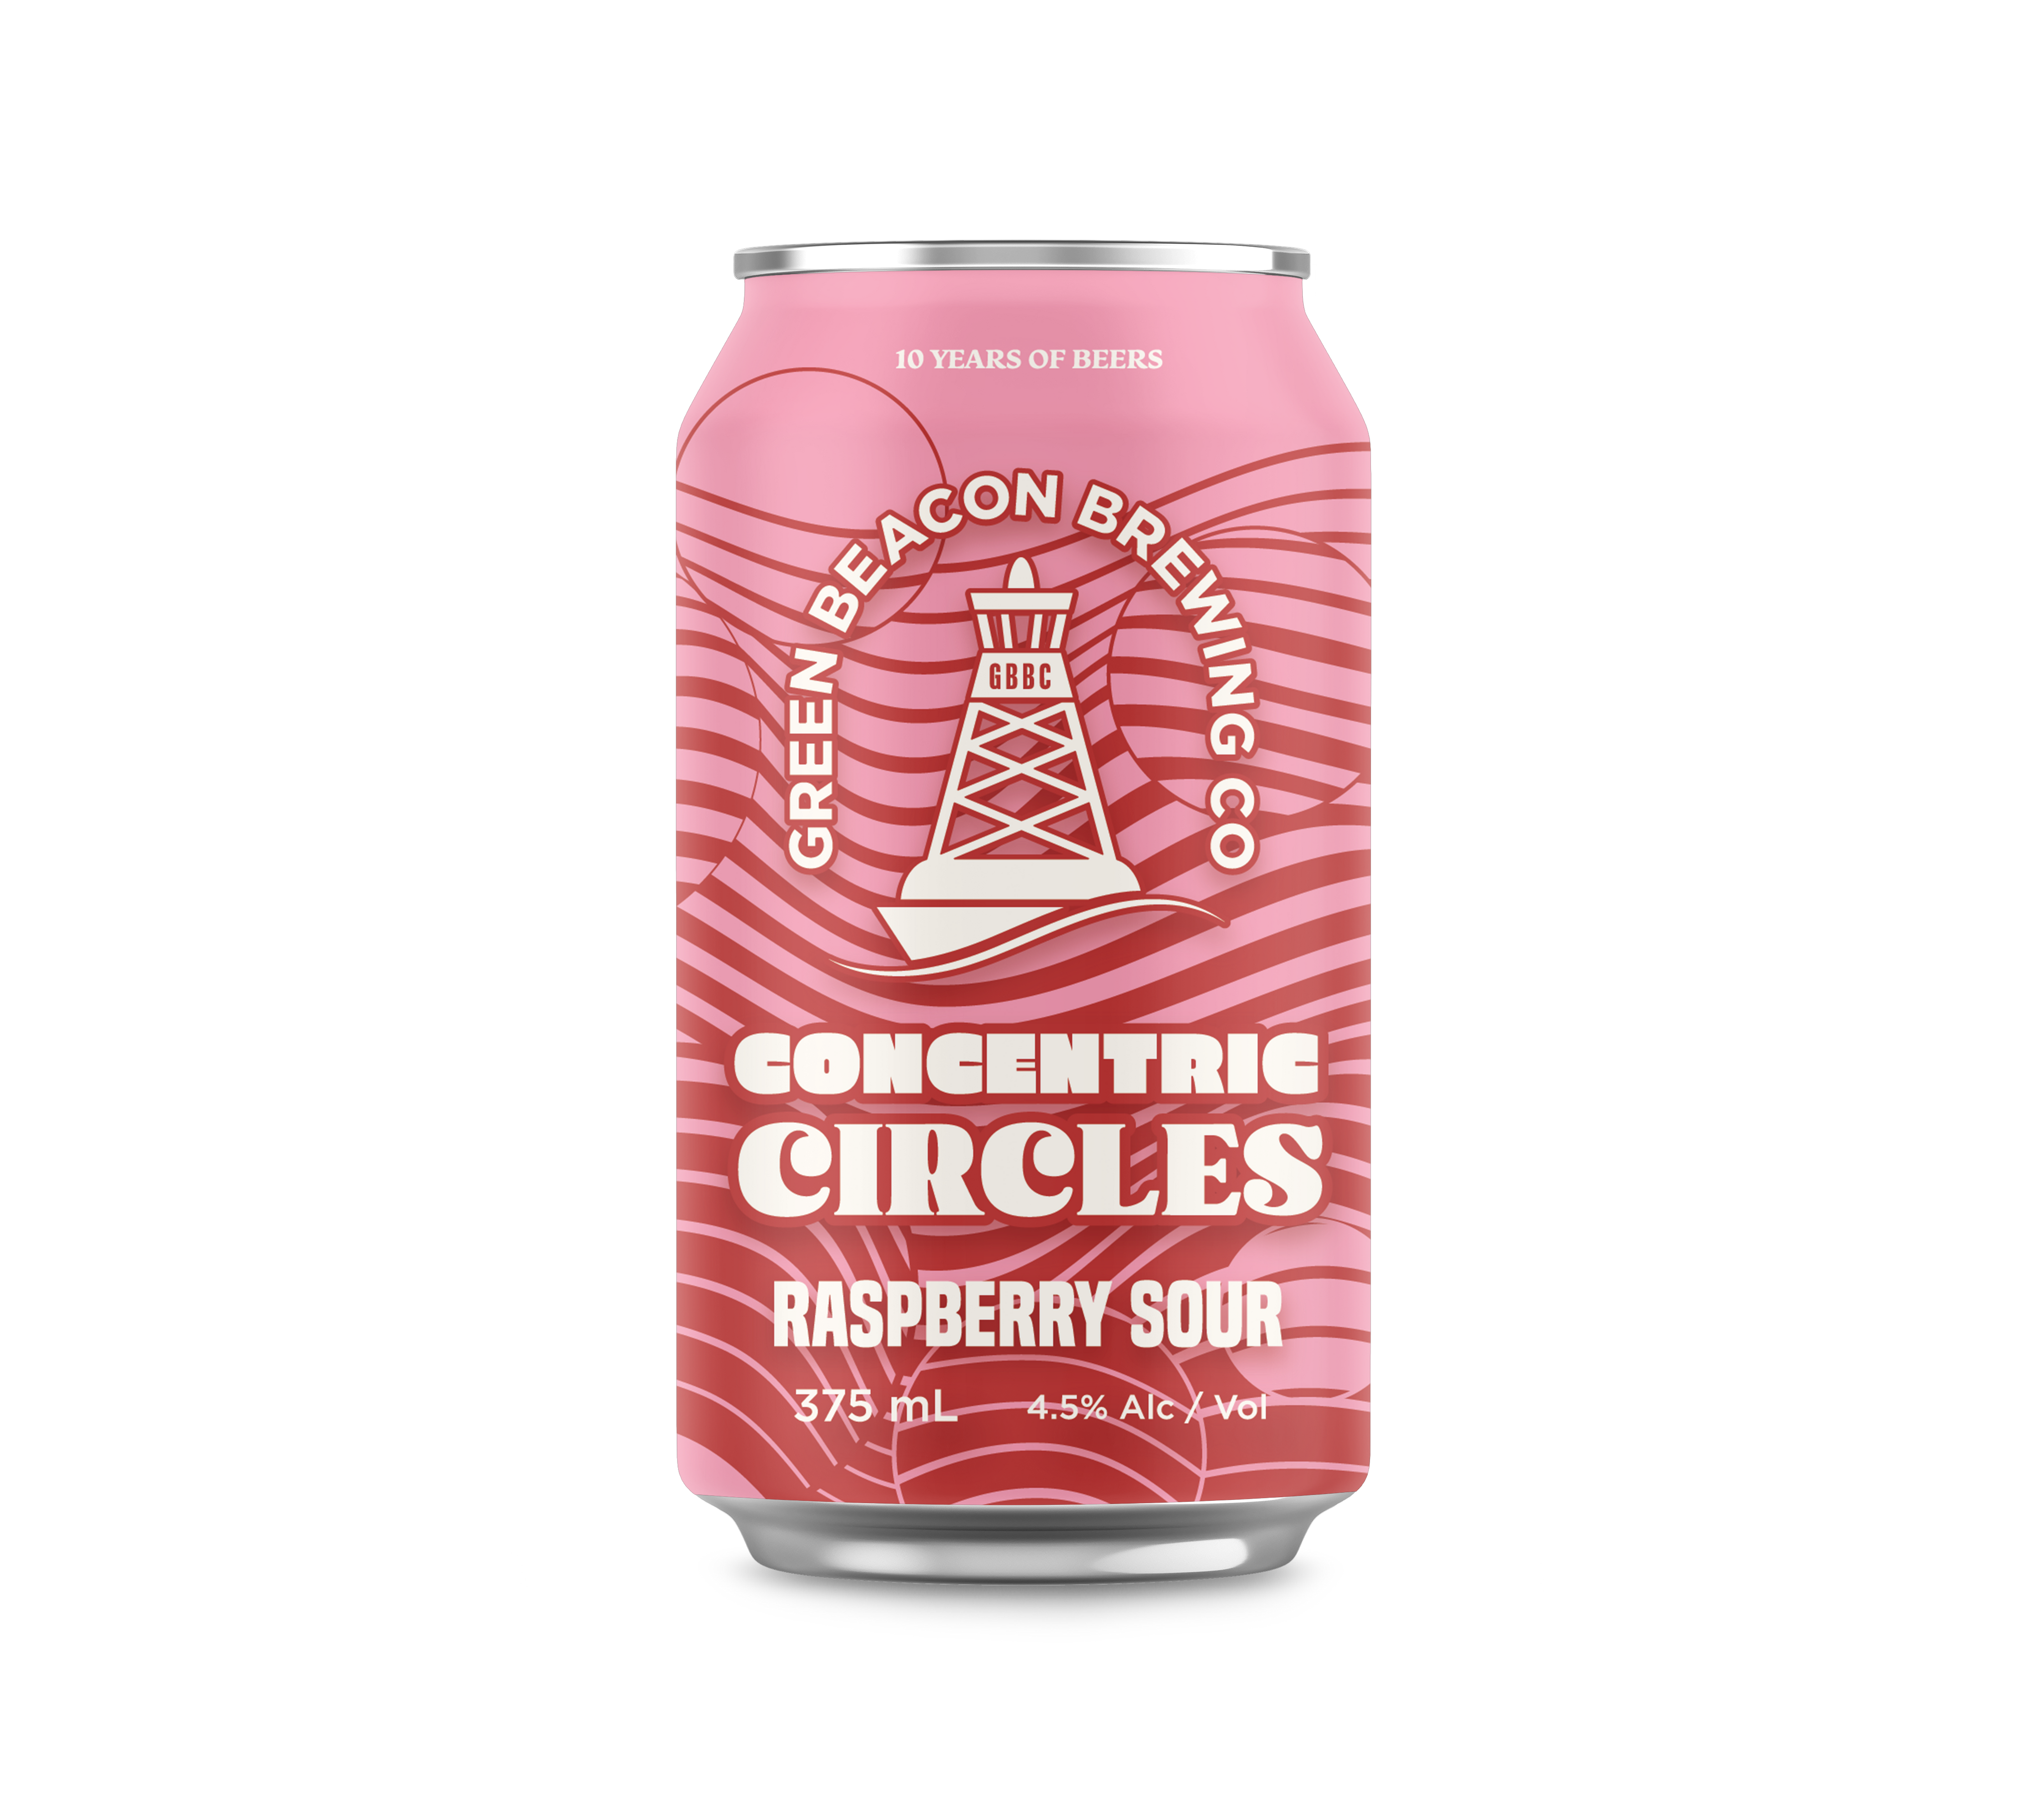 CONCENTRICCIRCLES_375ML_Can_Mockup.png